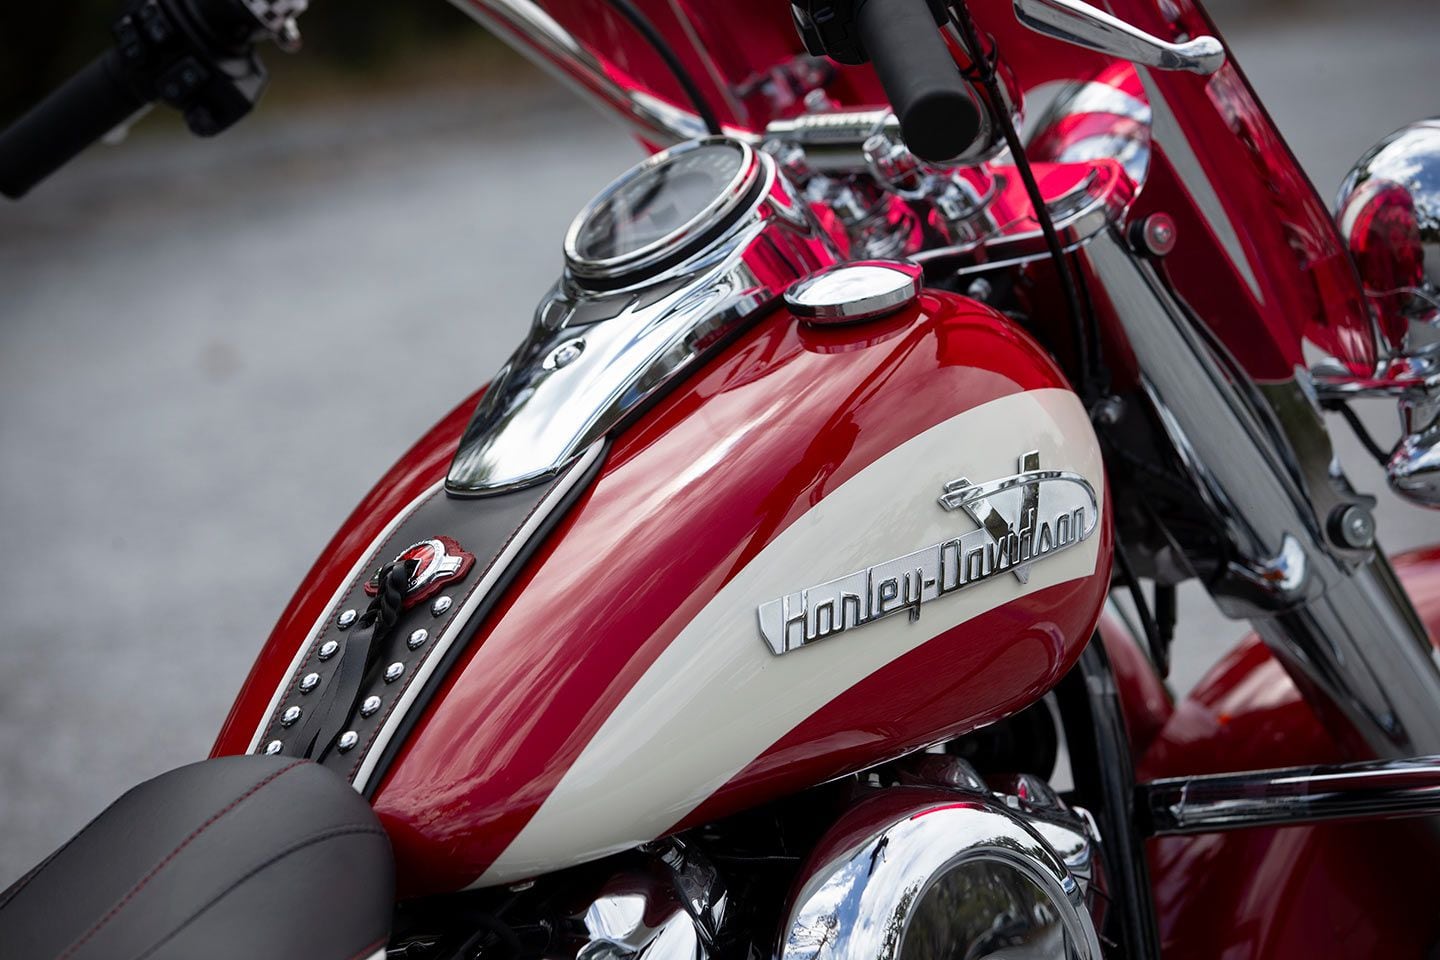 It might help to look twice; 1950s cues include stylized Harley-Davidson font with V flourish. Two-tone “slash” paint job is also lifted from the 1956 Hydra-Glide model.